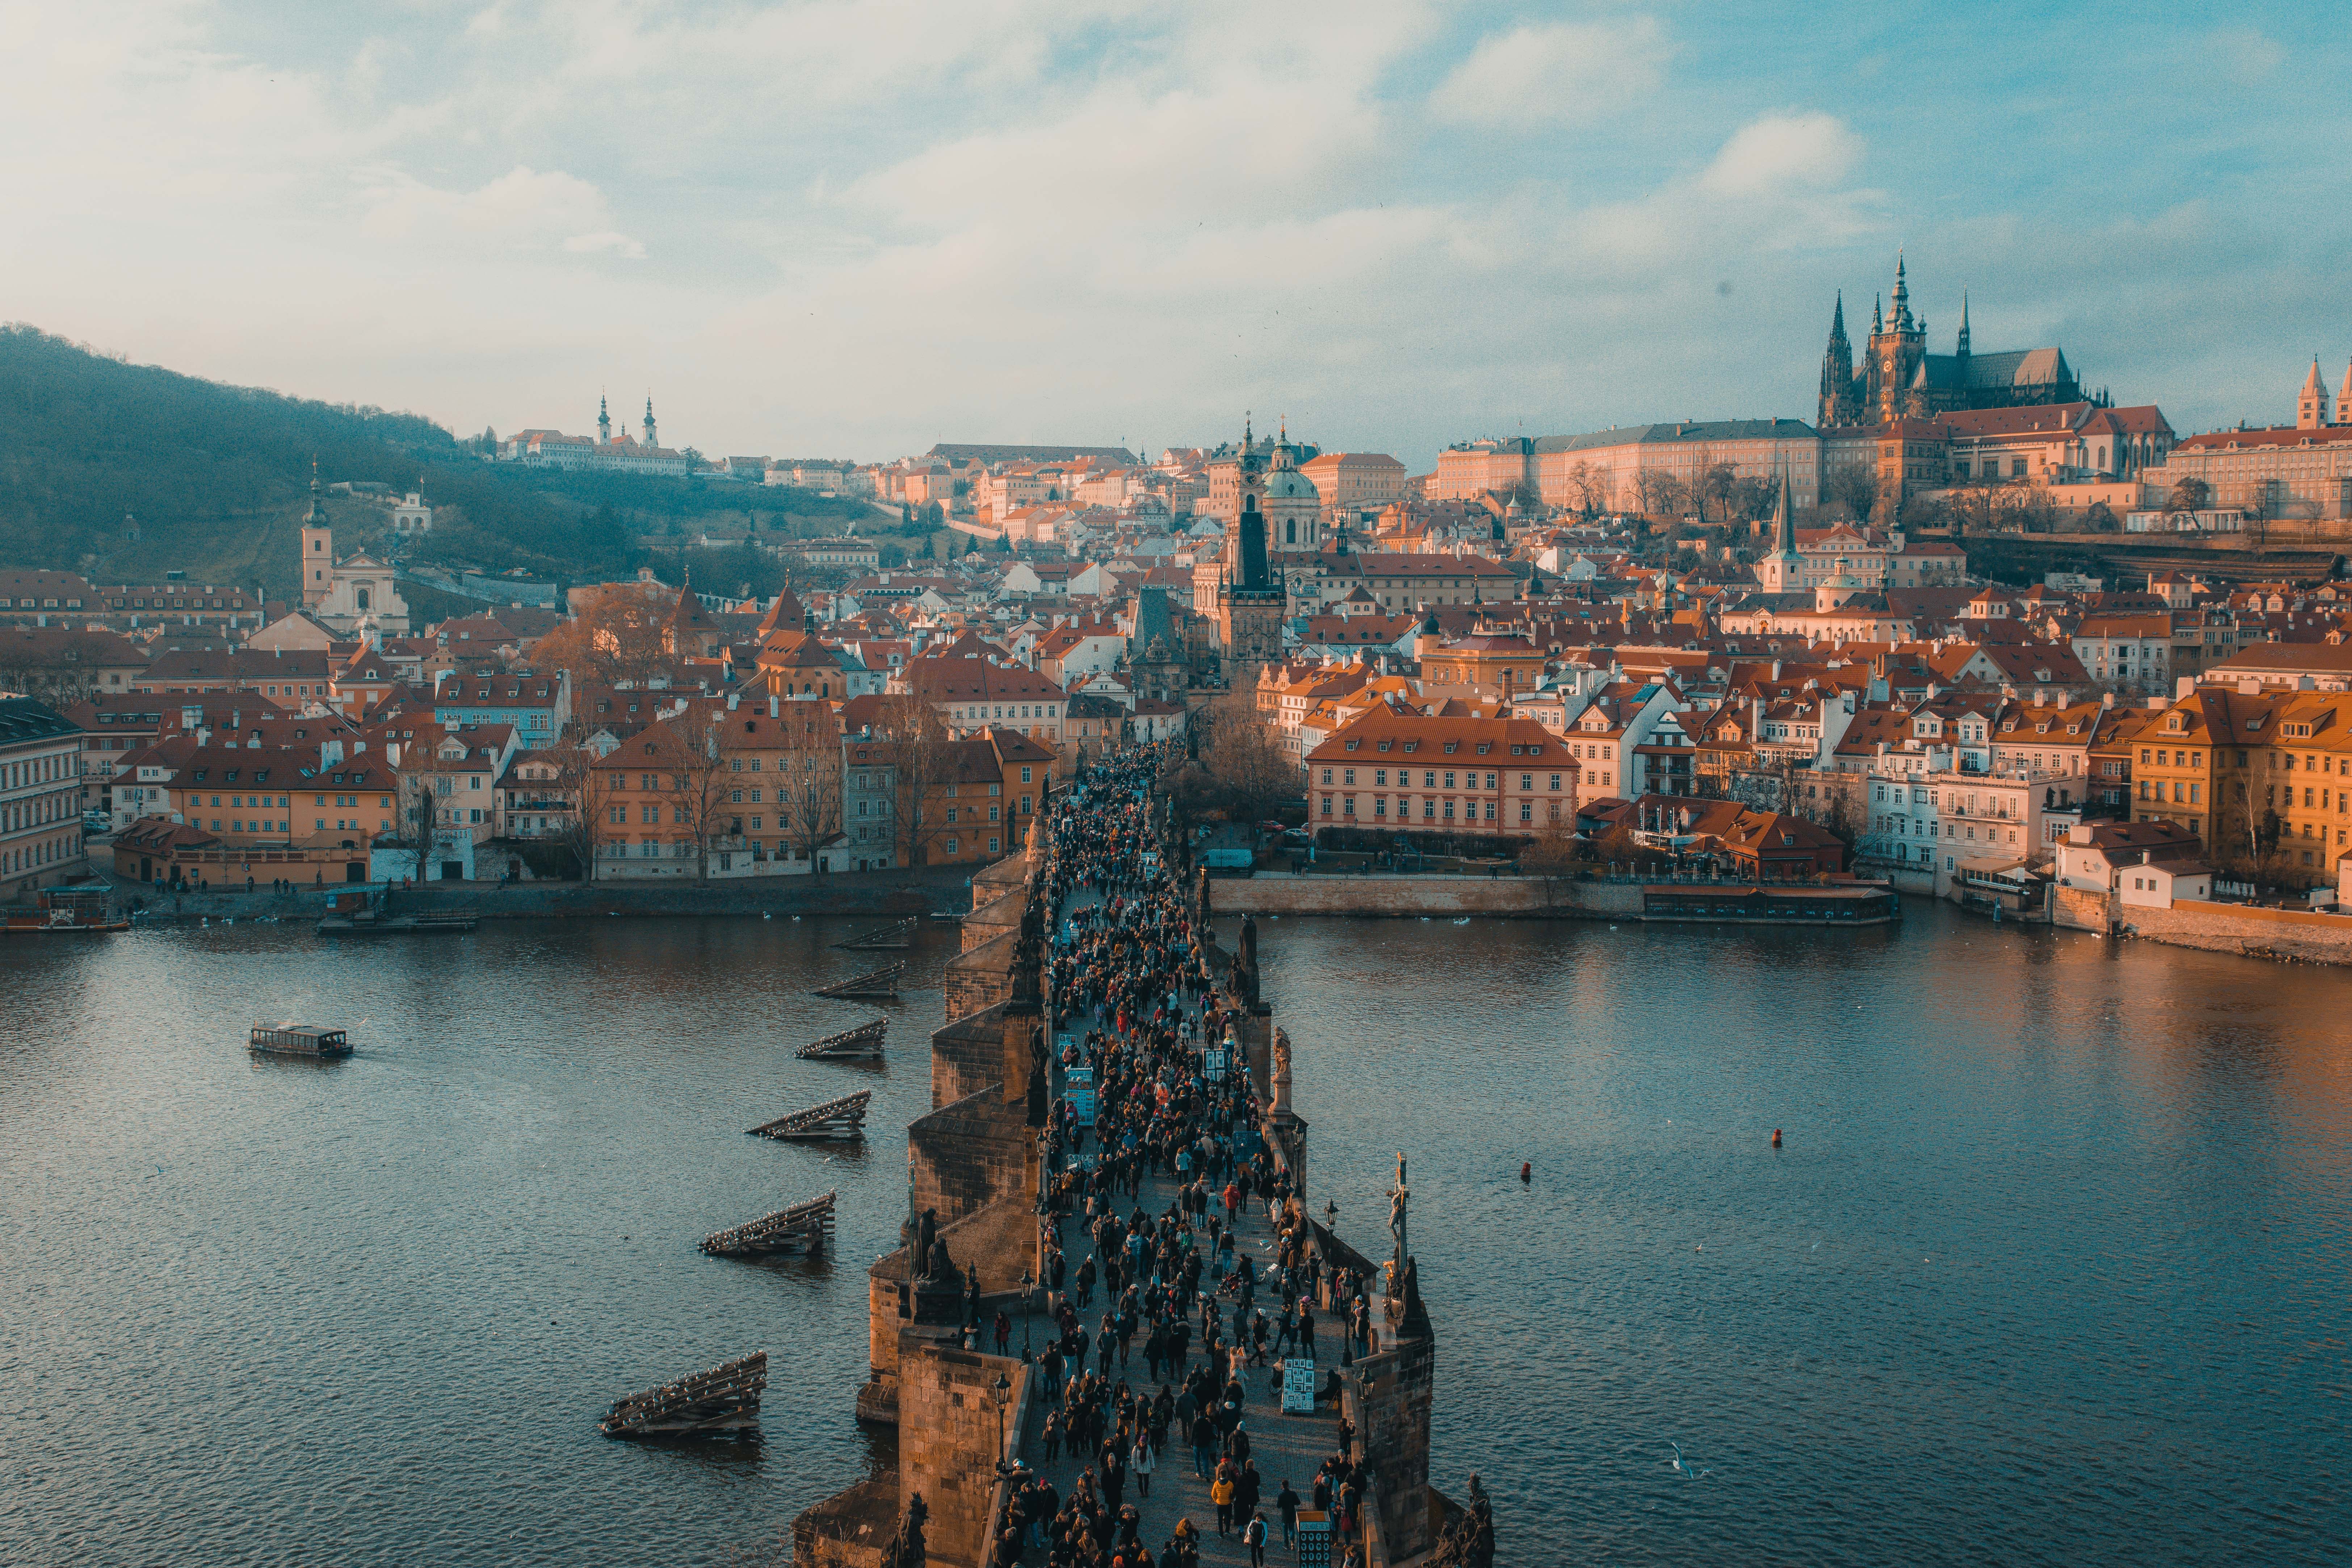 Image of Prague from high point of view